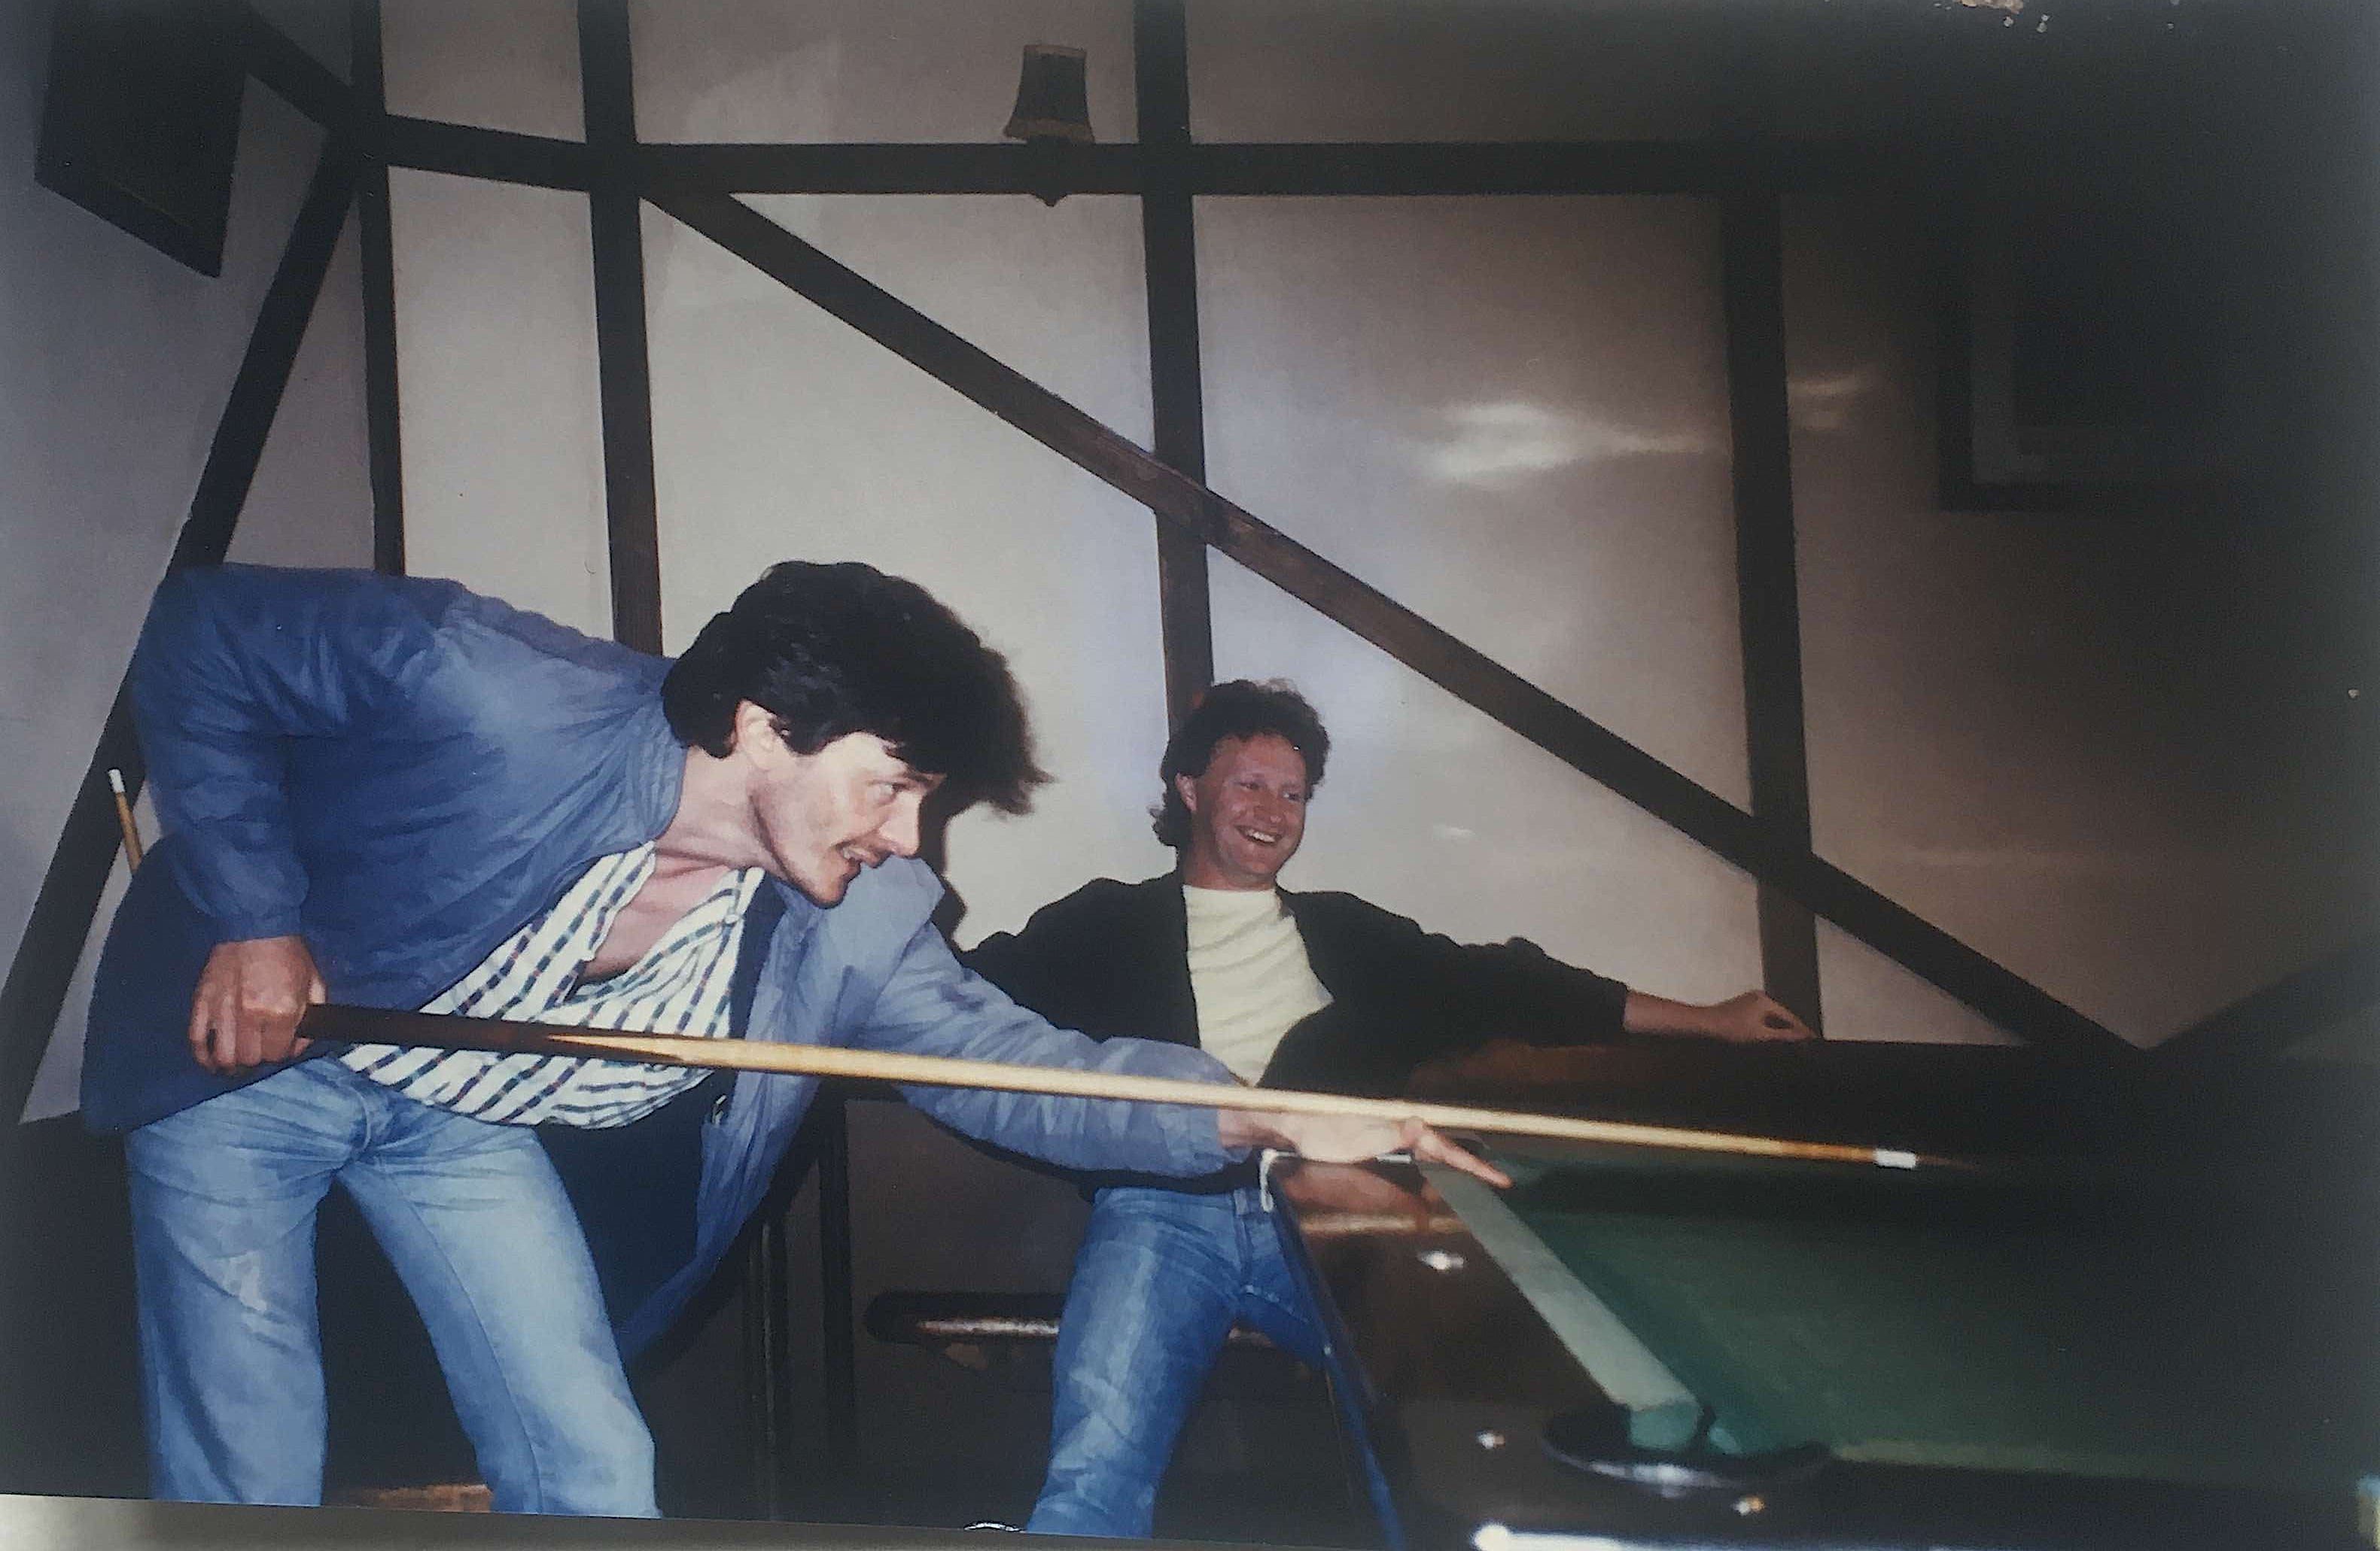 Paul Rodden shooting pool with Micky Gallanagh Buncrana Donegal. Circa 1985.